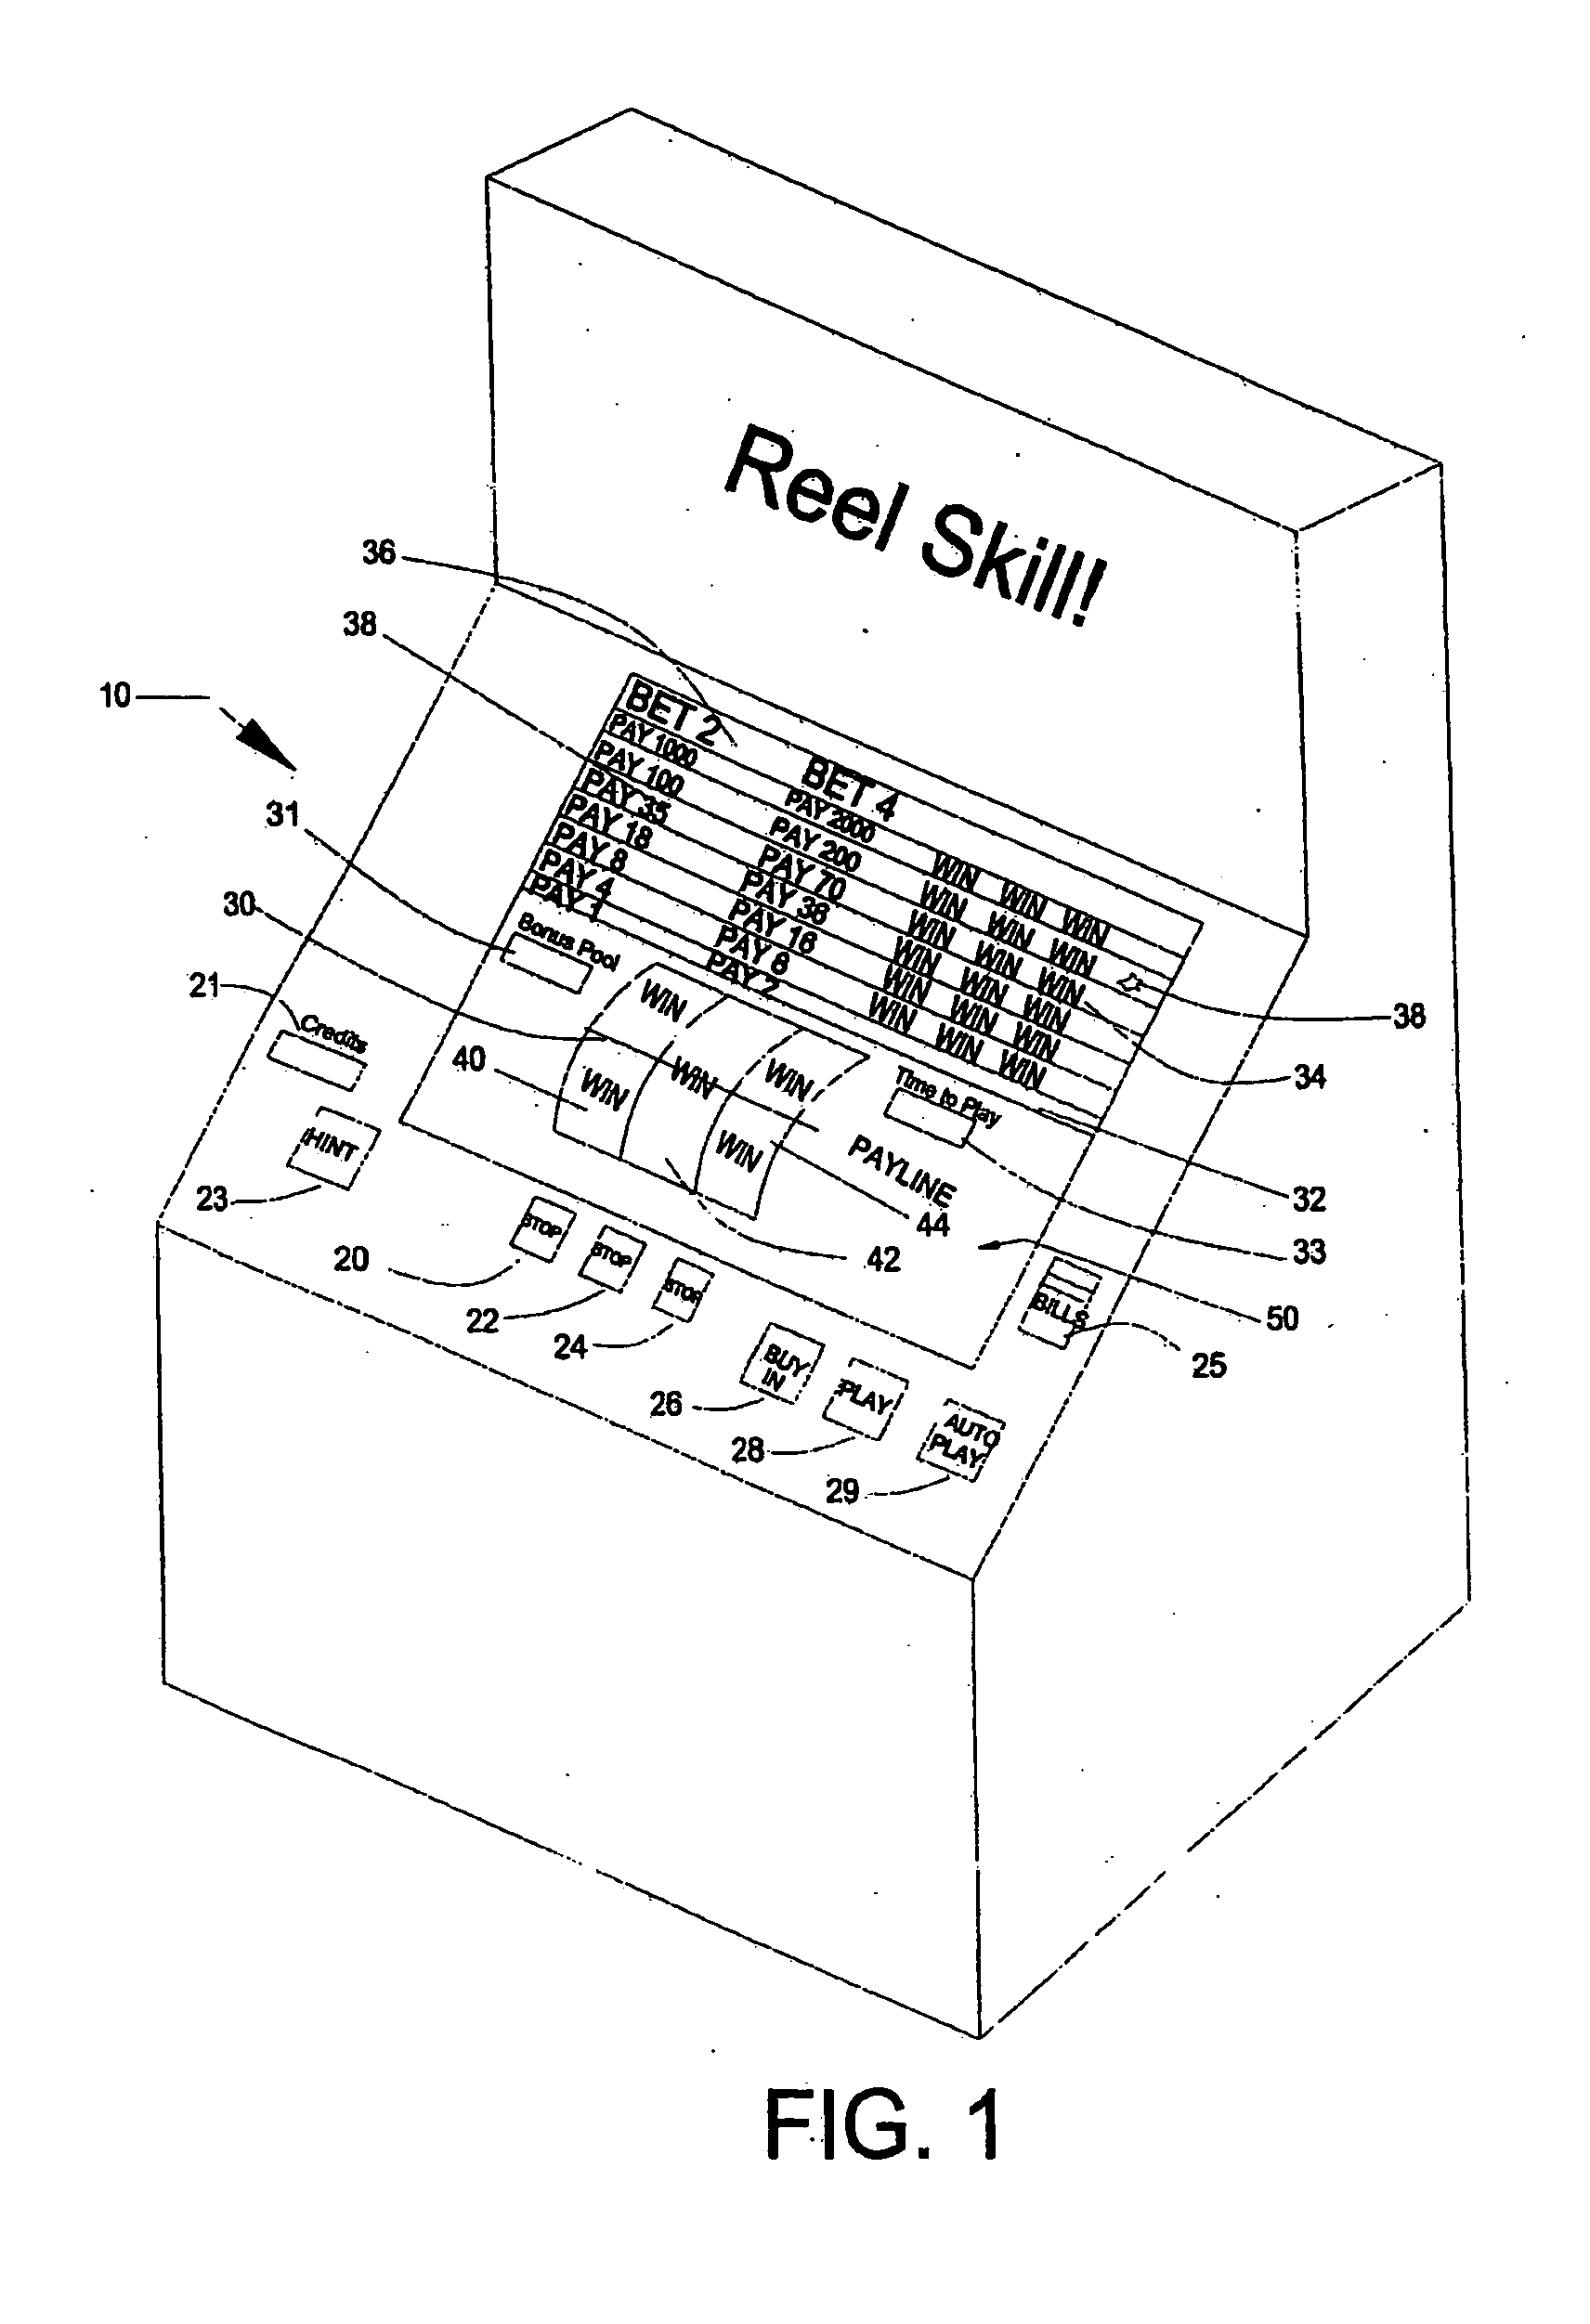 Method and apparatus for skill game play and awards